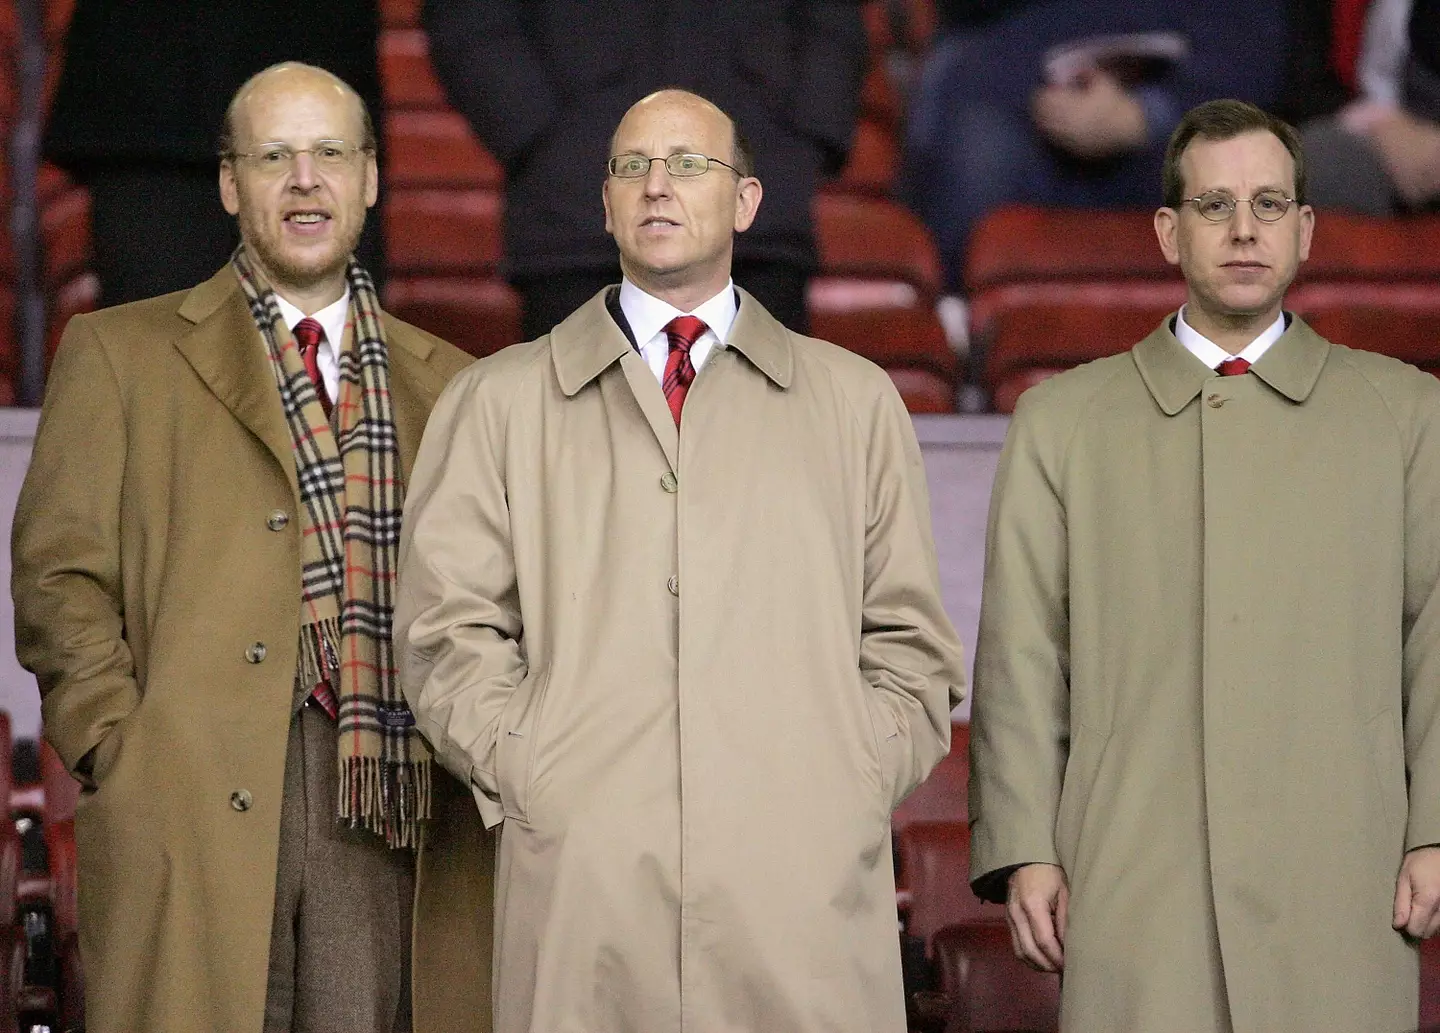 The Glazers in attendance for a Manchester United match. Image: Getty